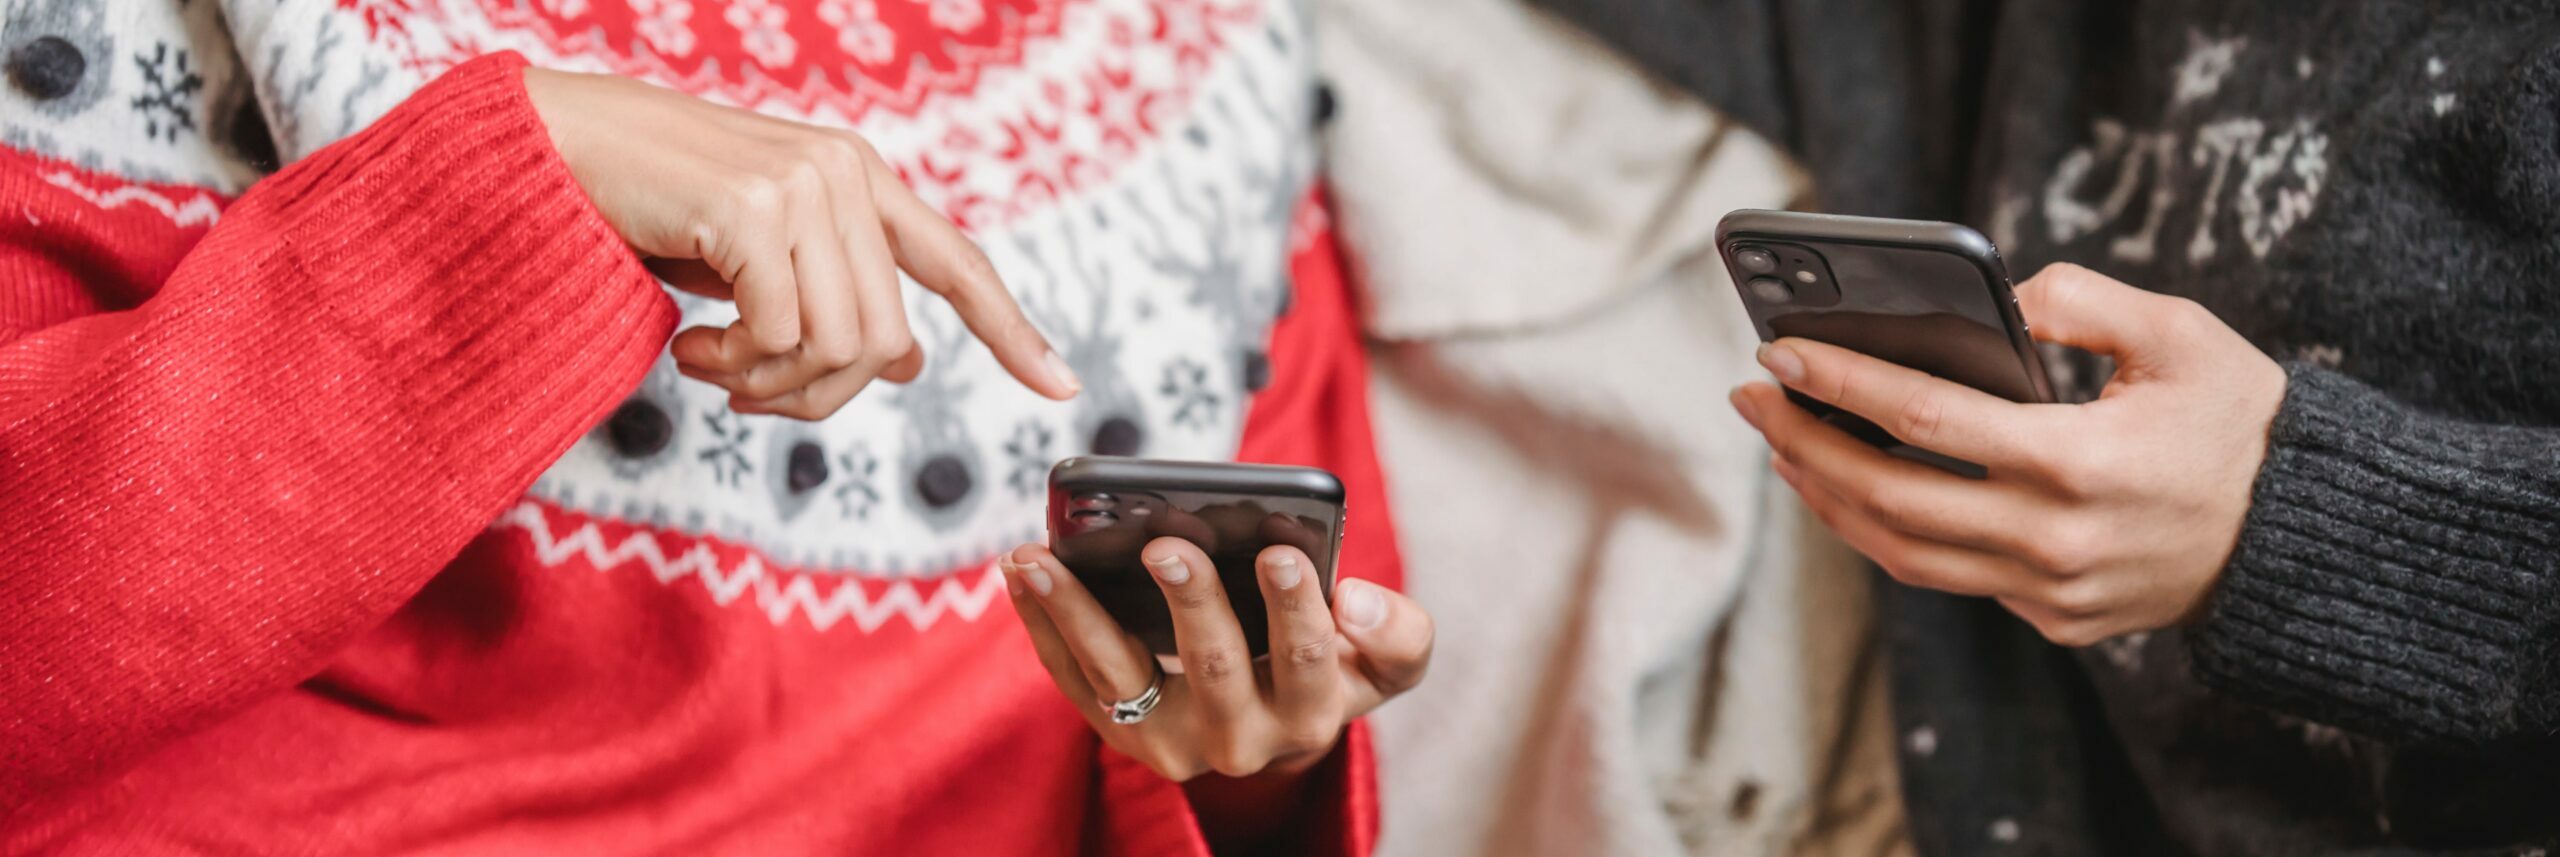 Two people wearing holiday-themed sweaters on smart phones